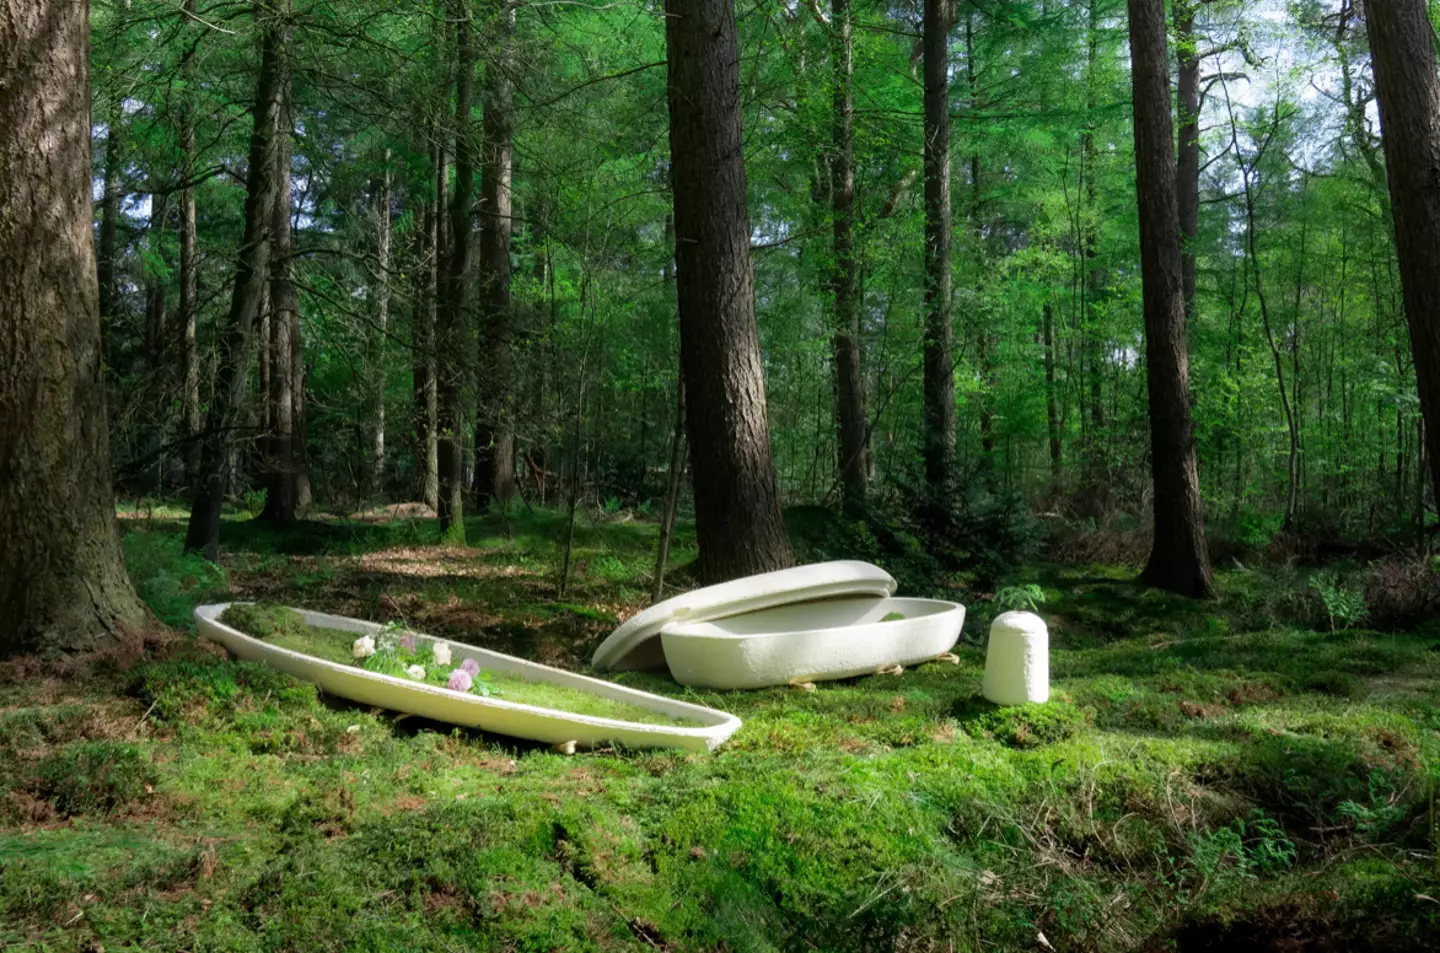 The 'world's first living coffin' is here.